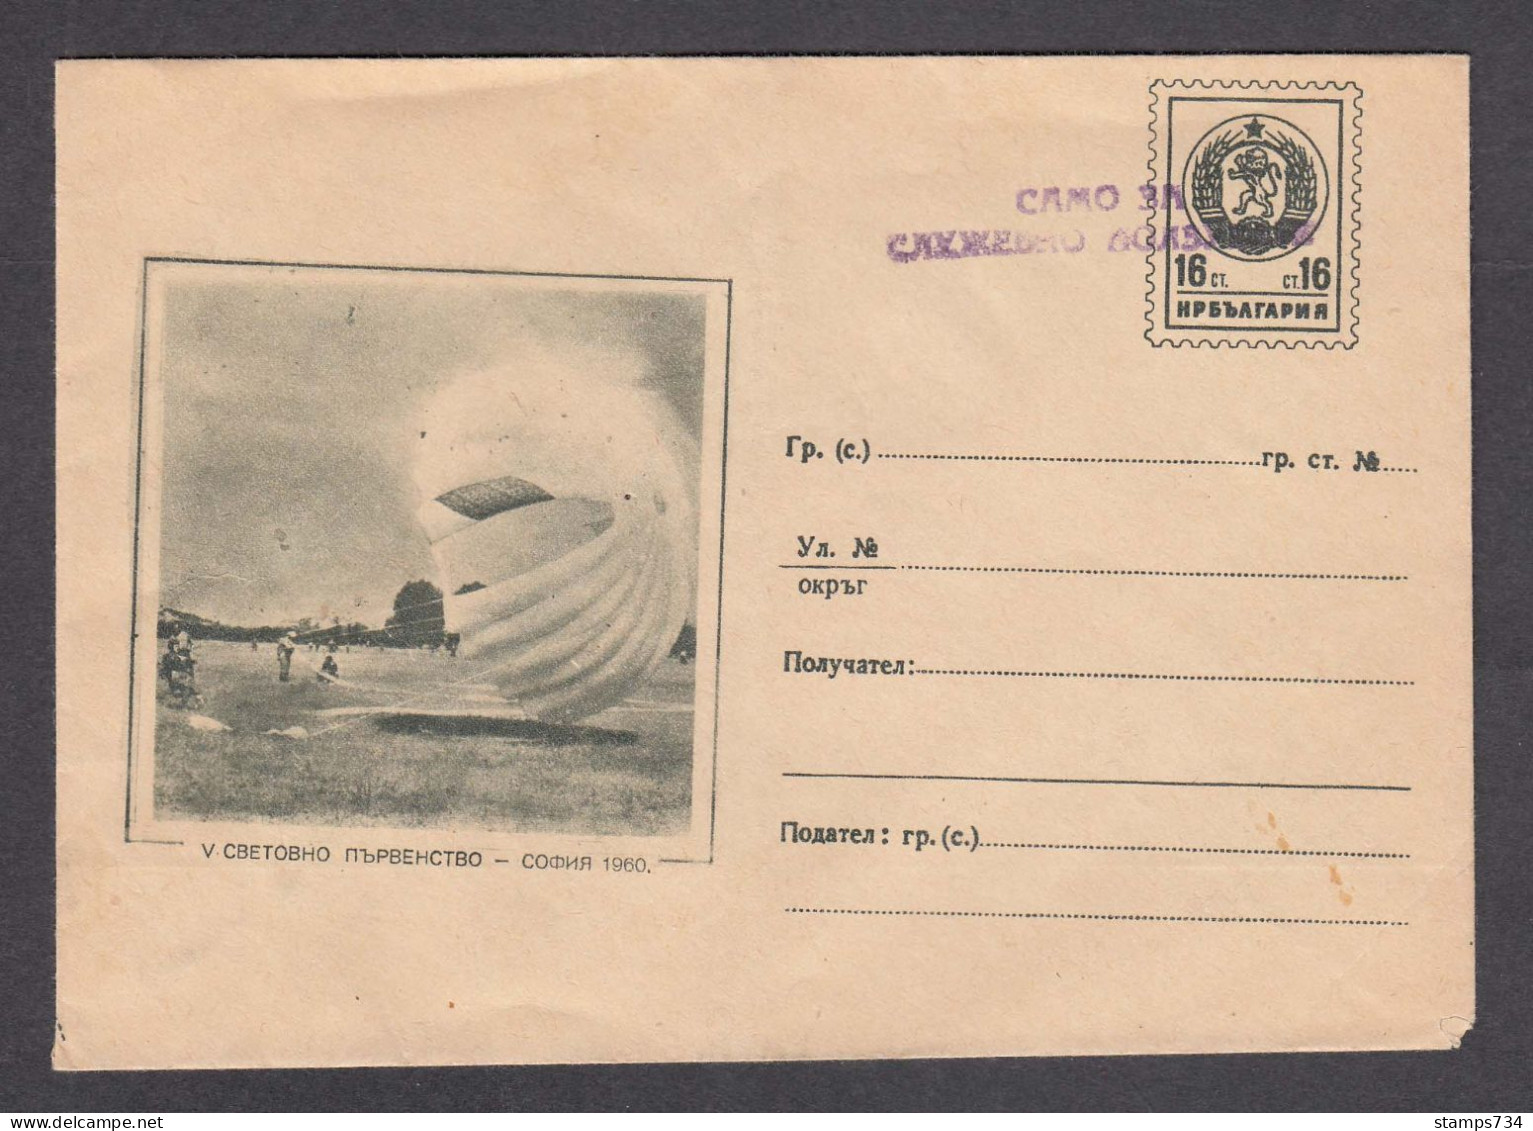 PS 212/1960 - Mint, 5. World Parachuting Championship, Sofia, FOR OFFICIAL USE ONLY, Post. Stationery - Bulgaria - Covers